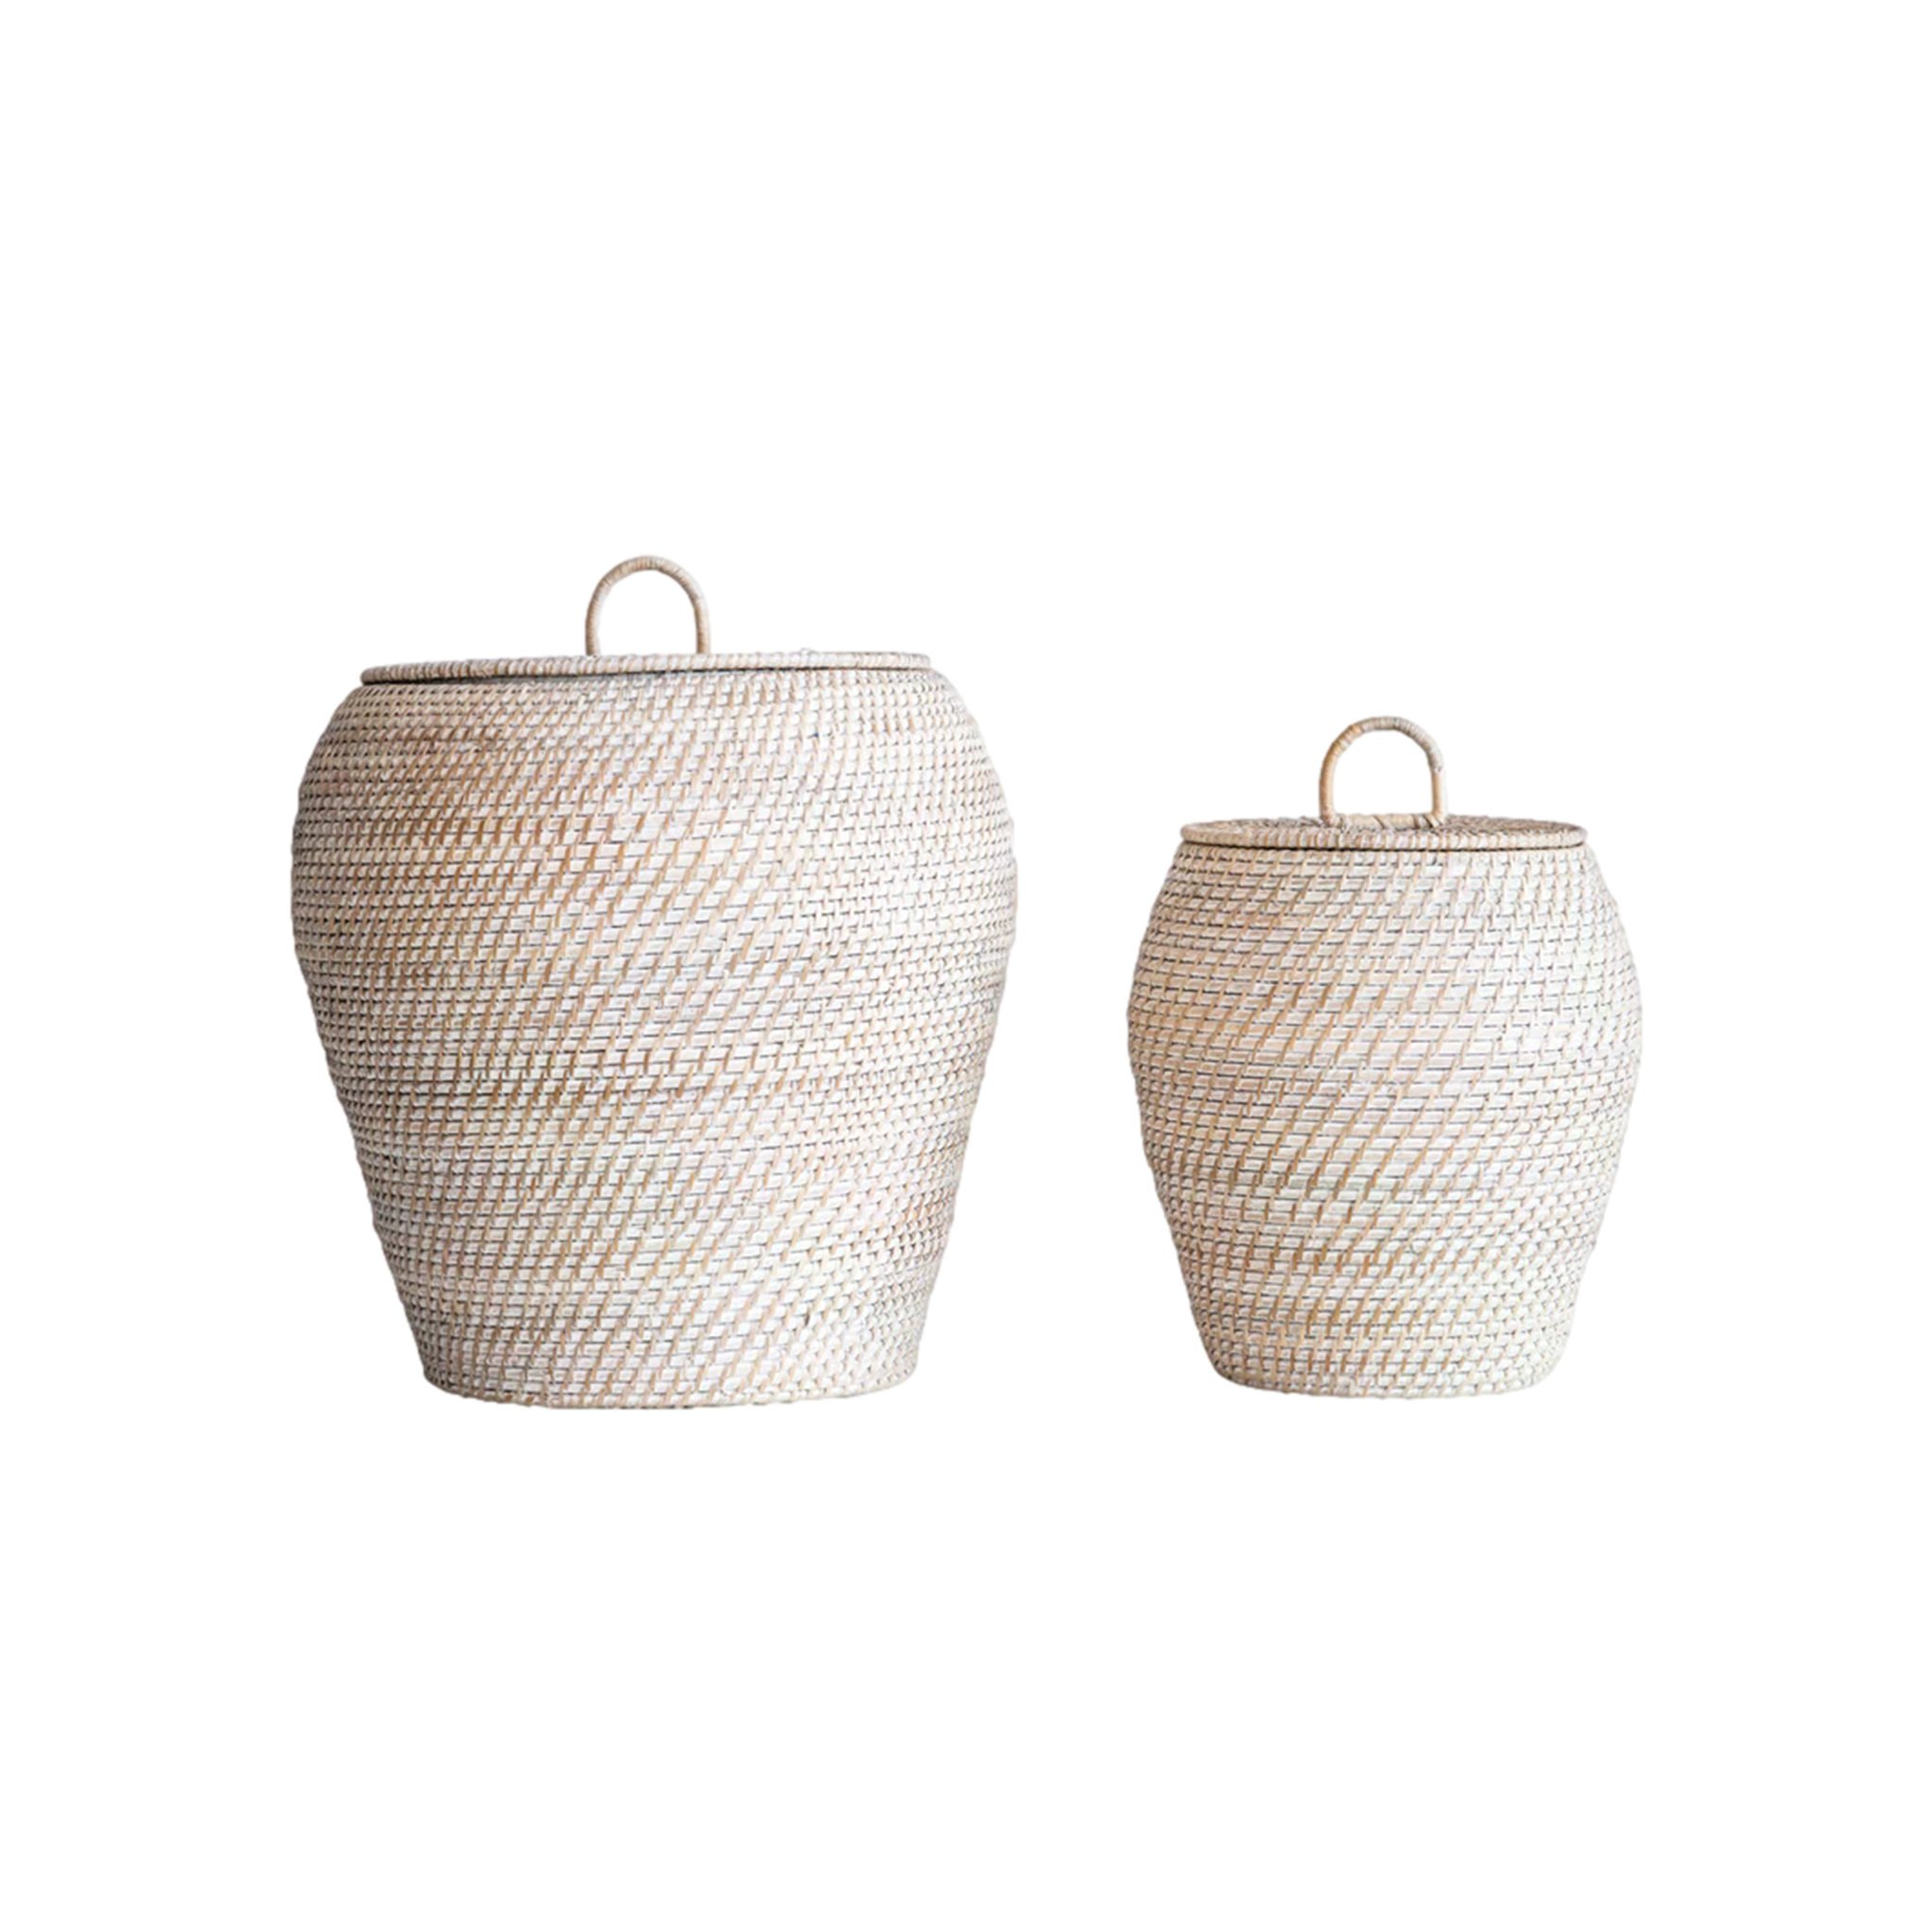 Hand-Woven Baskets with Lids, Set of 2